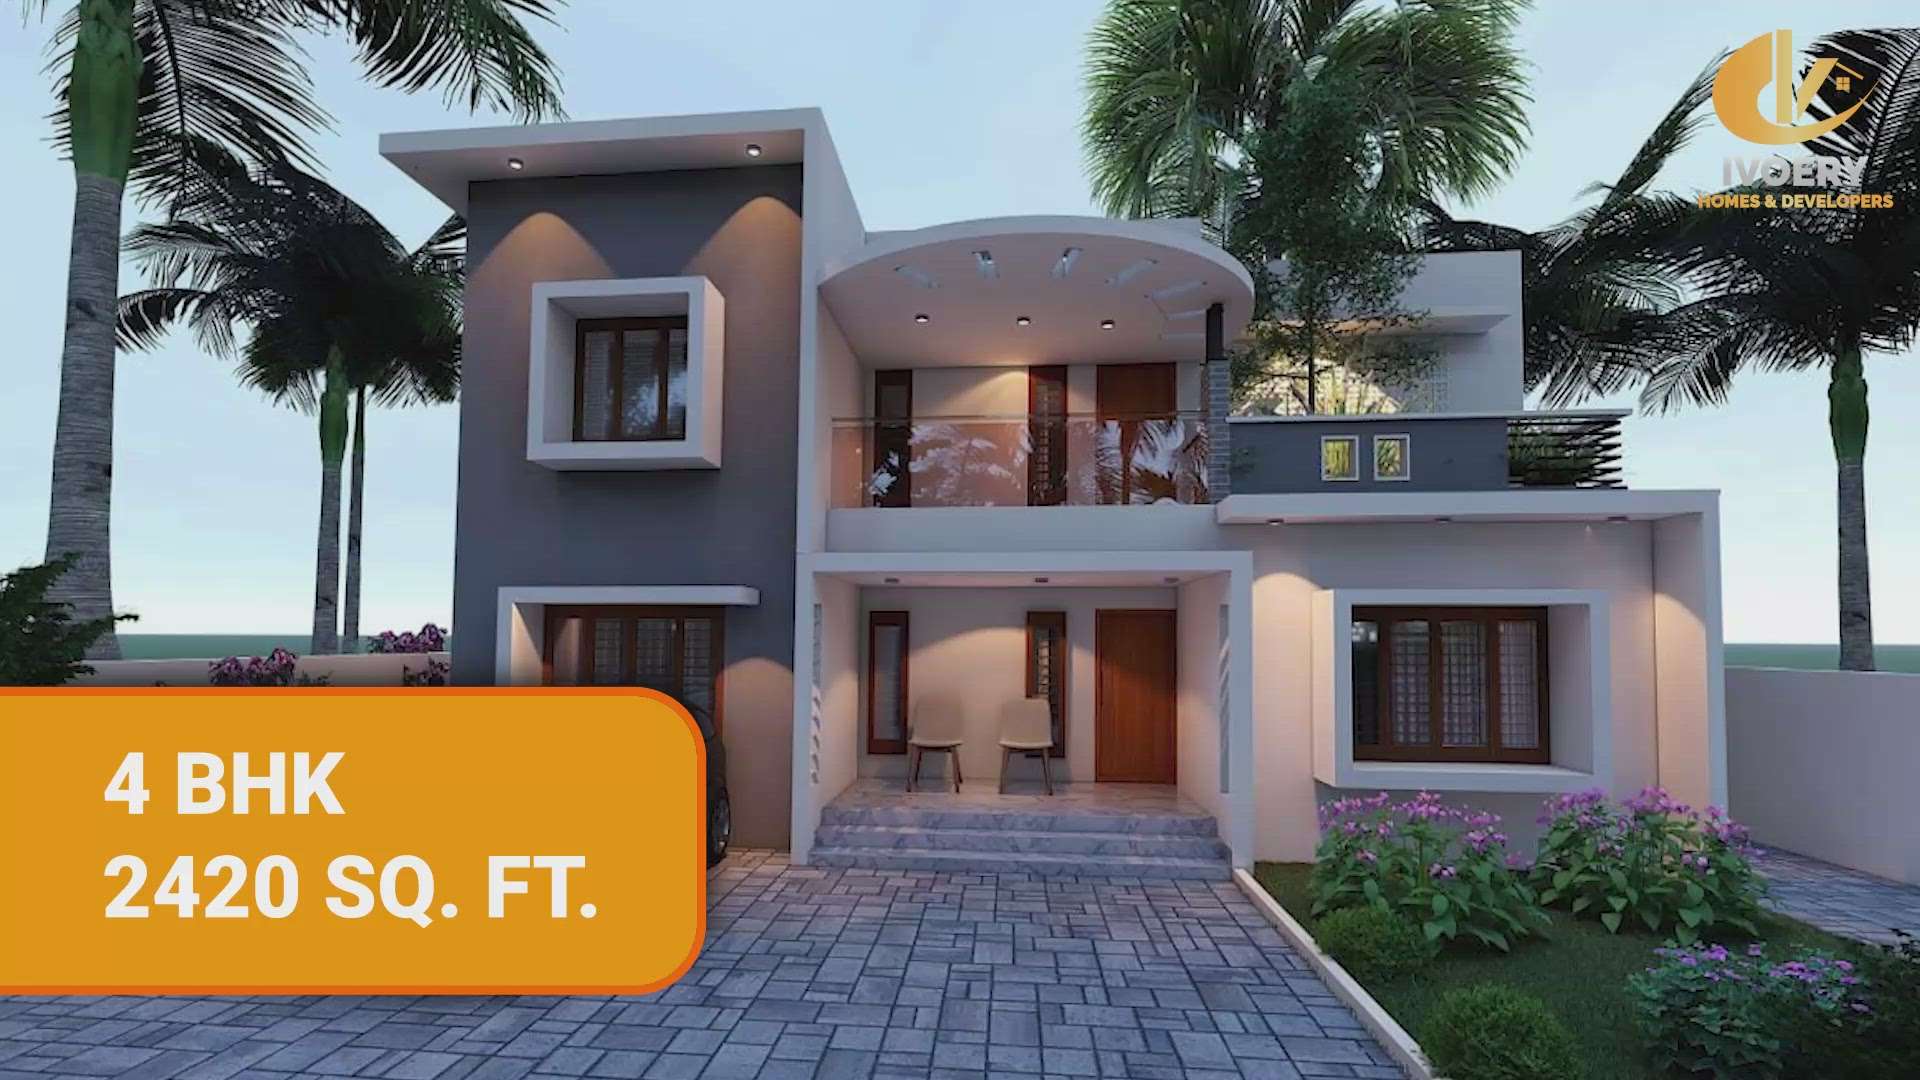 4BHK 2420 sq ft
Contact us immediately at 8055234222 for 3d visualization, interior designing and construction requirements. 

 #ivoeryhomes  #ivoeryhomesanddevelopers  #3d  #3dvisualisation  #InteriorDesigner  #HouseConstruction  #constructioncompany  #ConstructionCompaniesInKerala